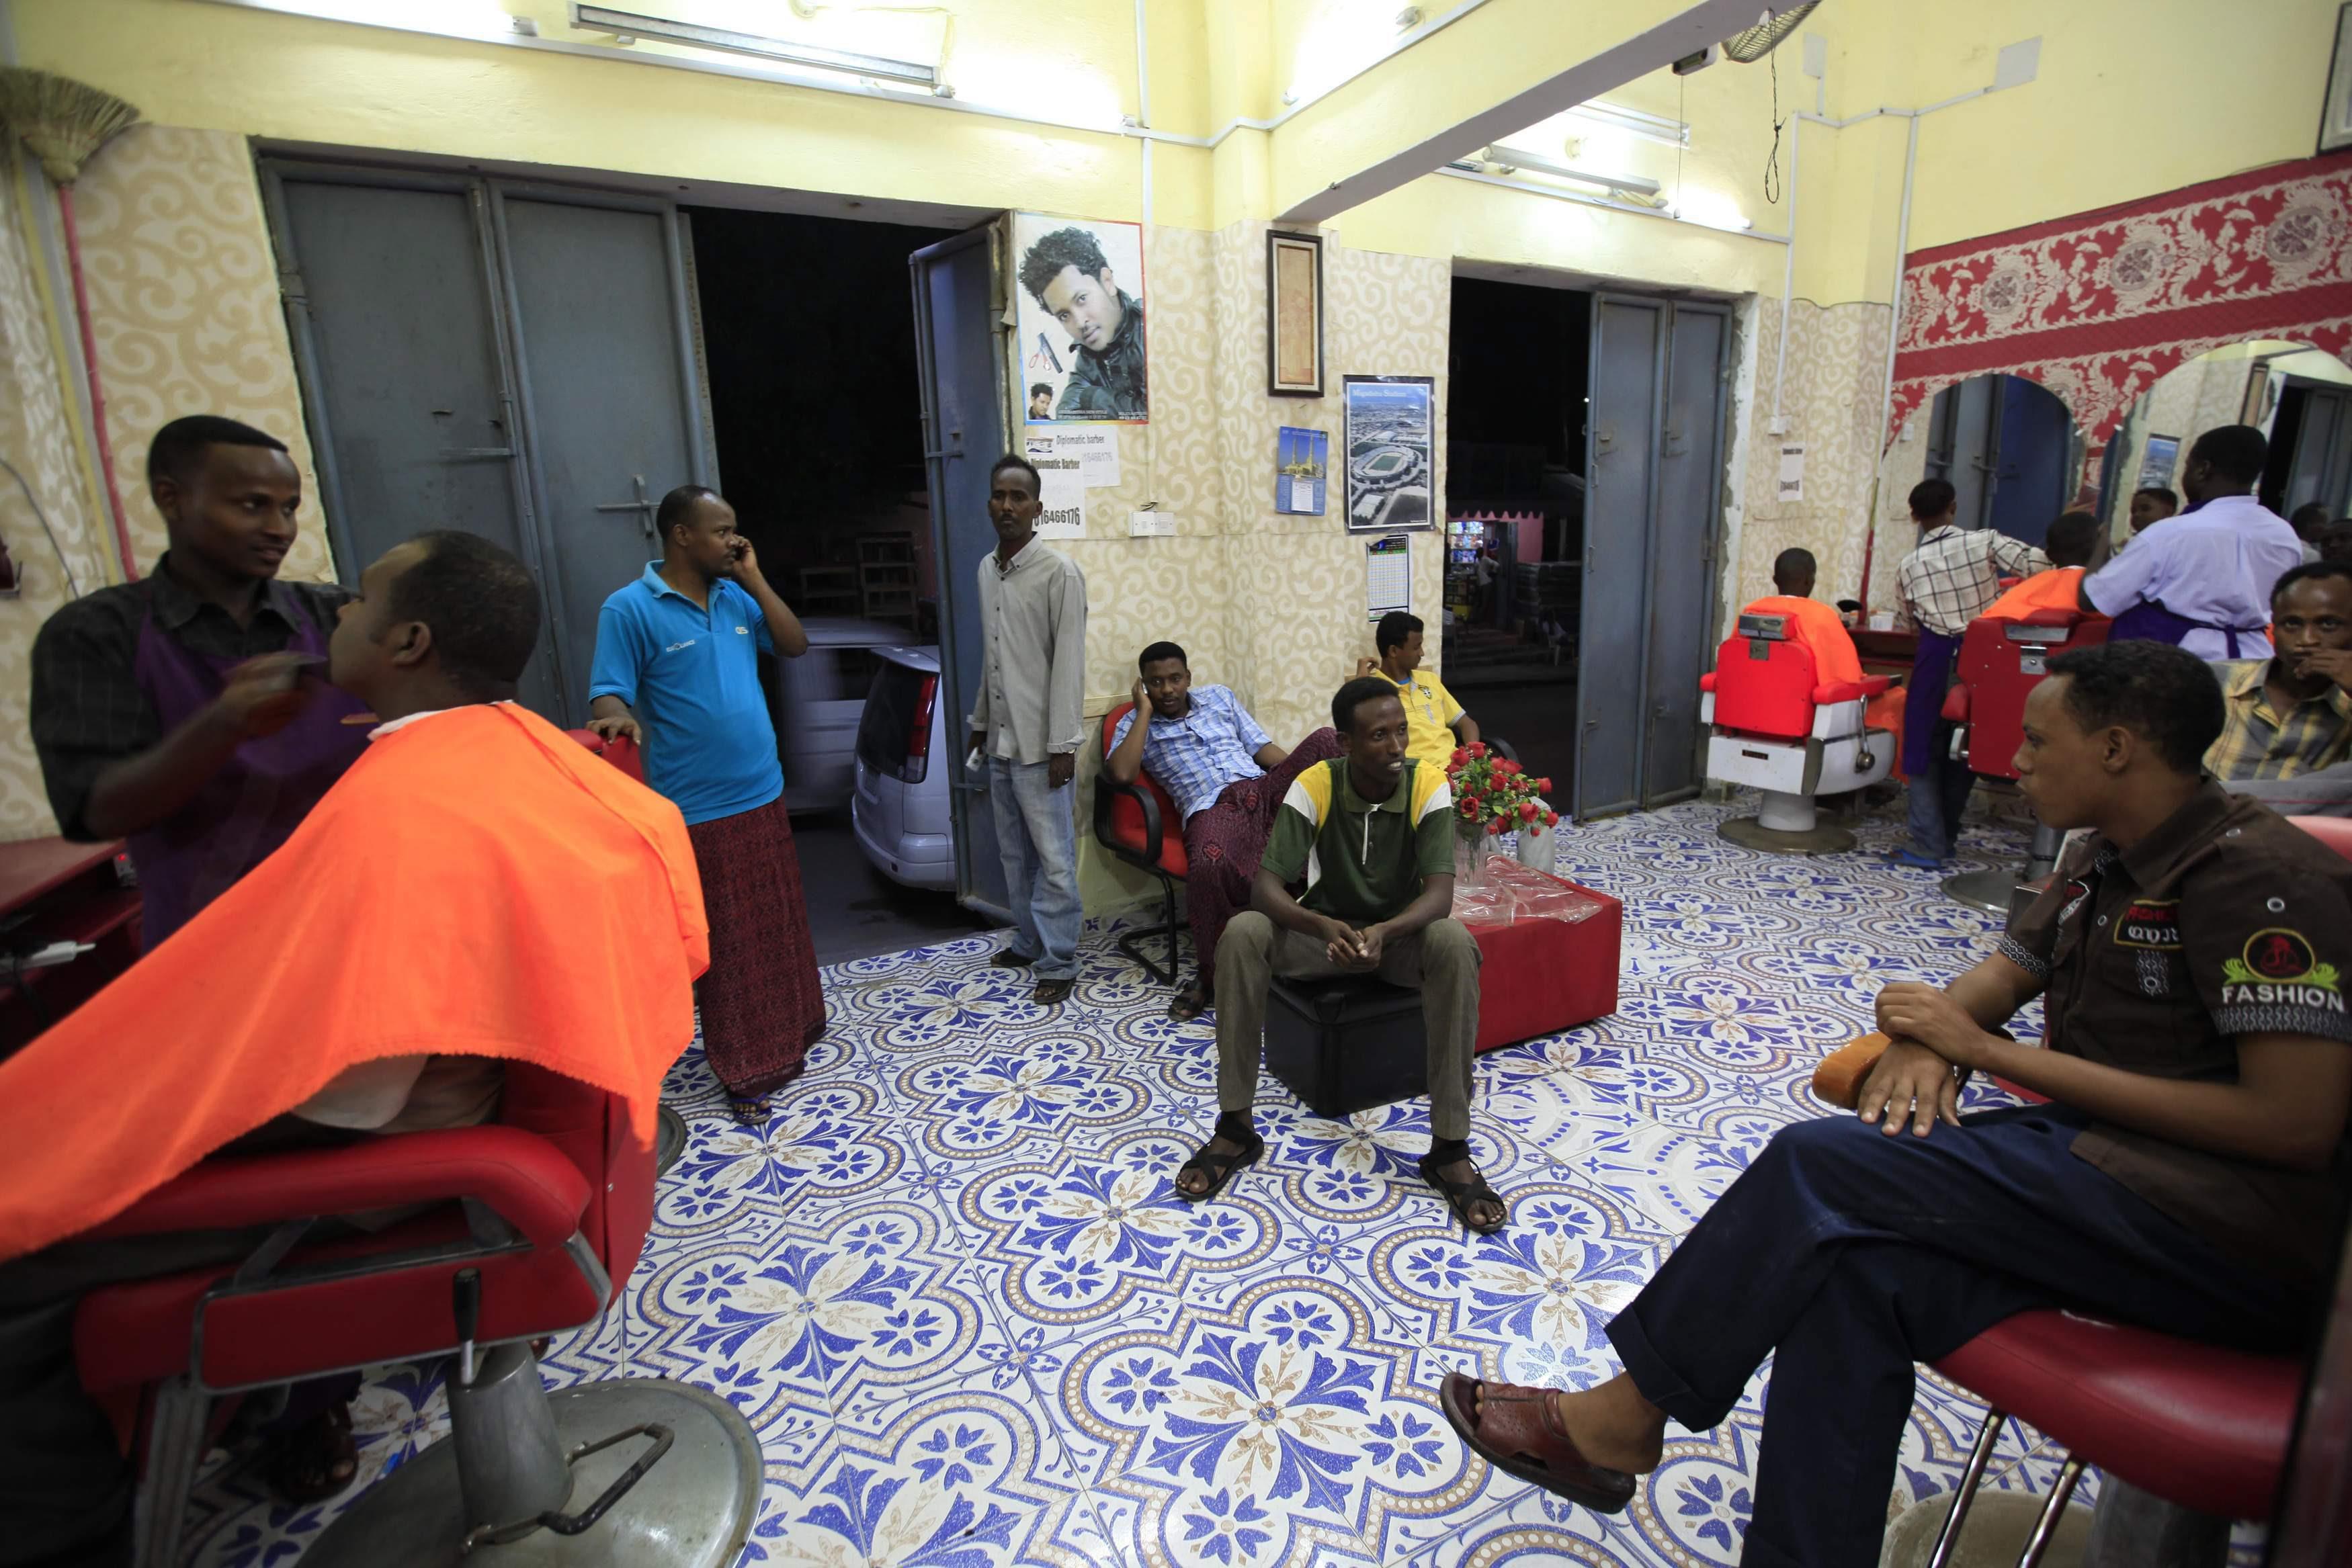 Men receive haircuts at a barber shop in Mogadishu October 3, 2013. Street lamps now brighten some o